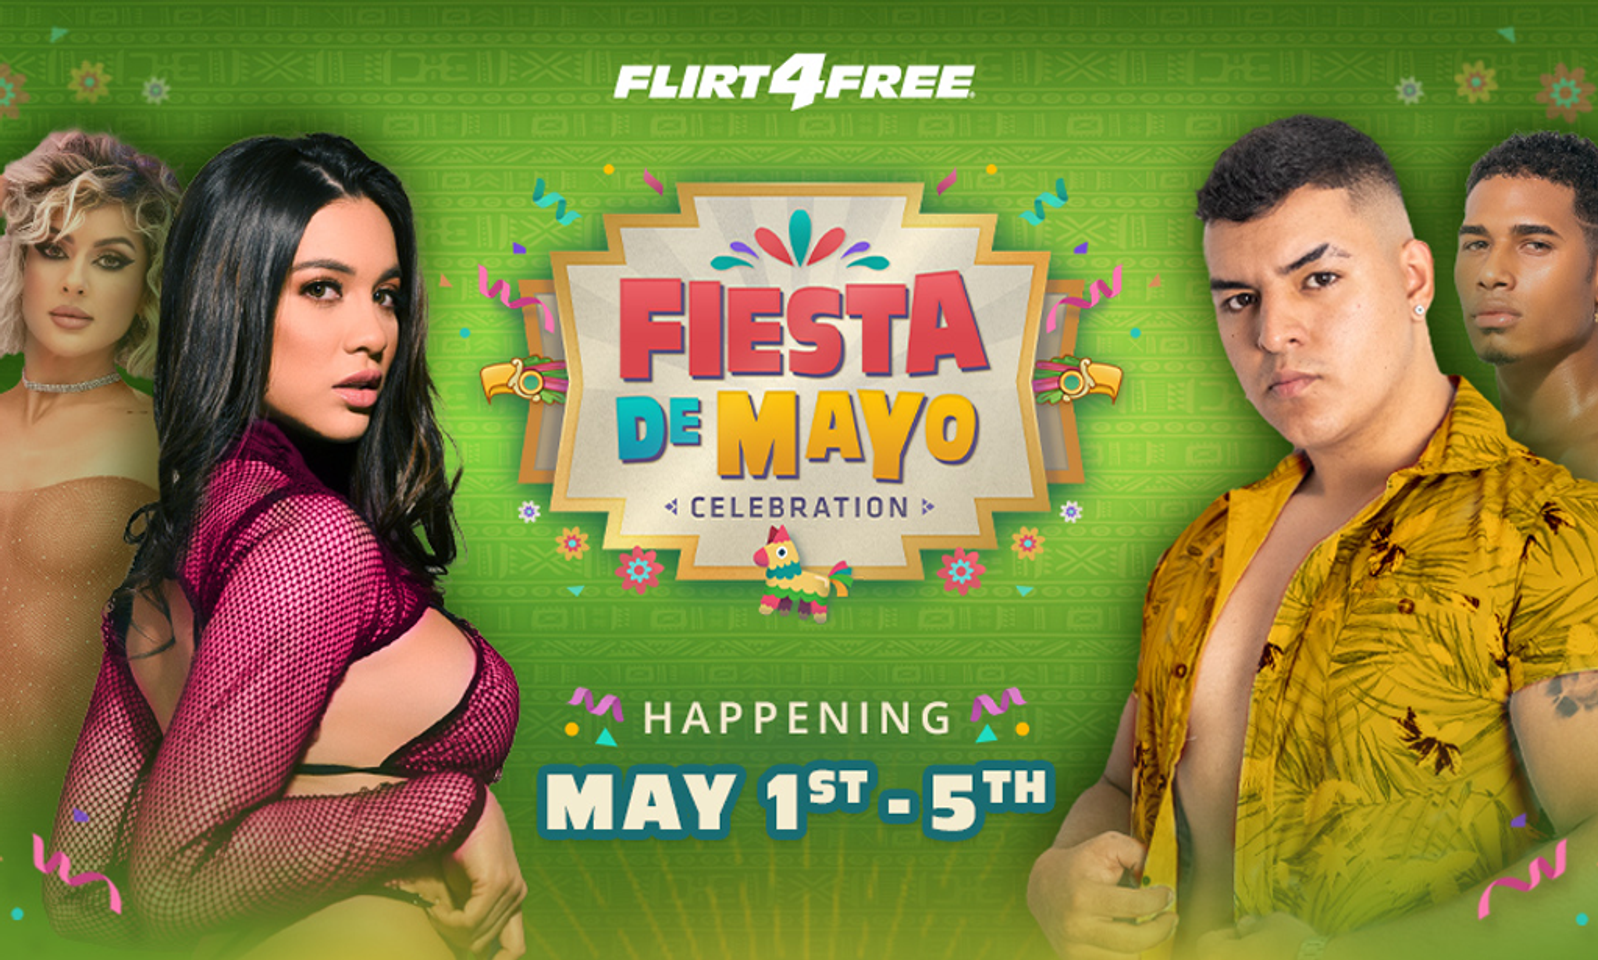 Flirt4Free Ramps Up for Annual Fiesta de Mayo Contest